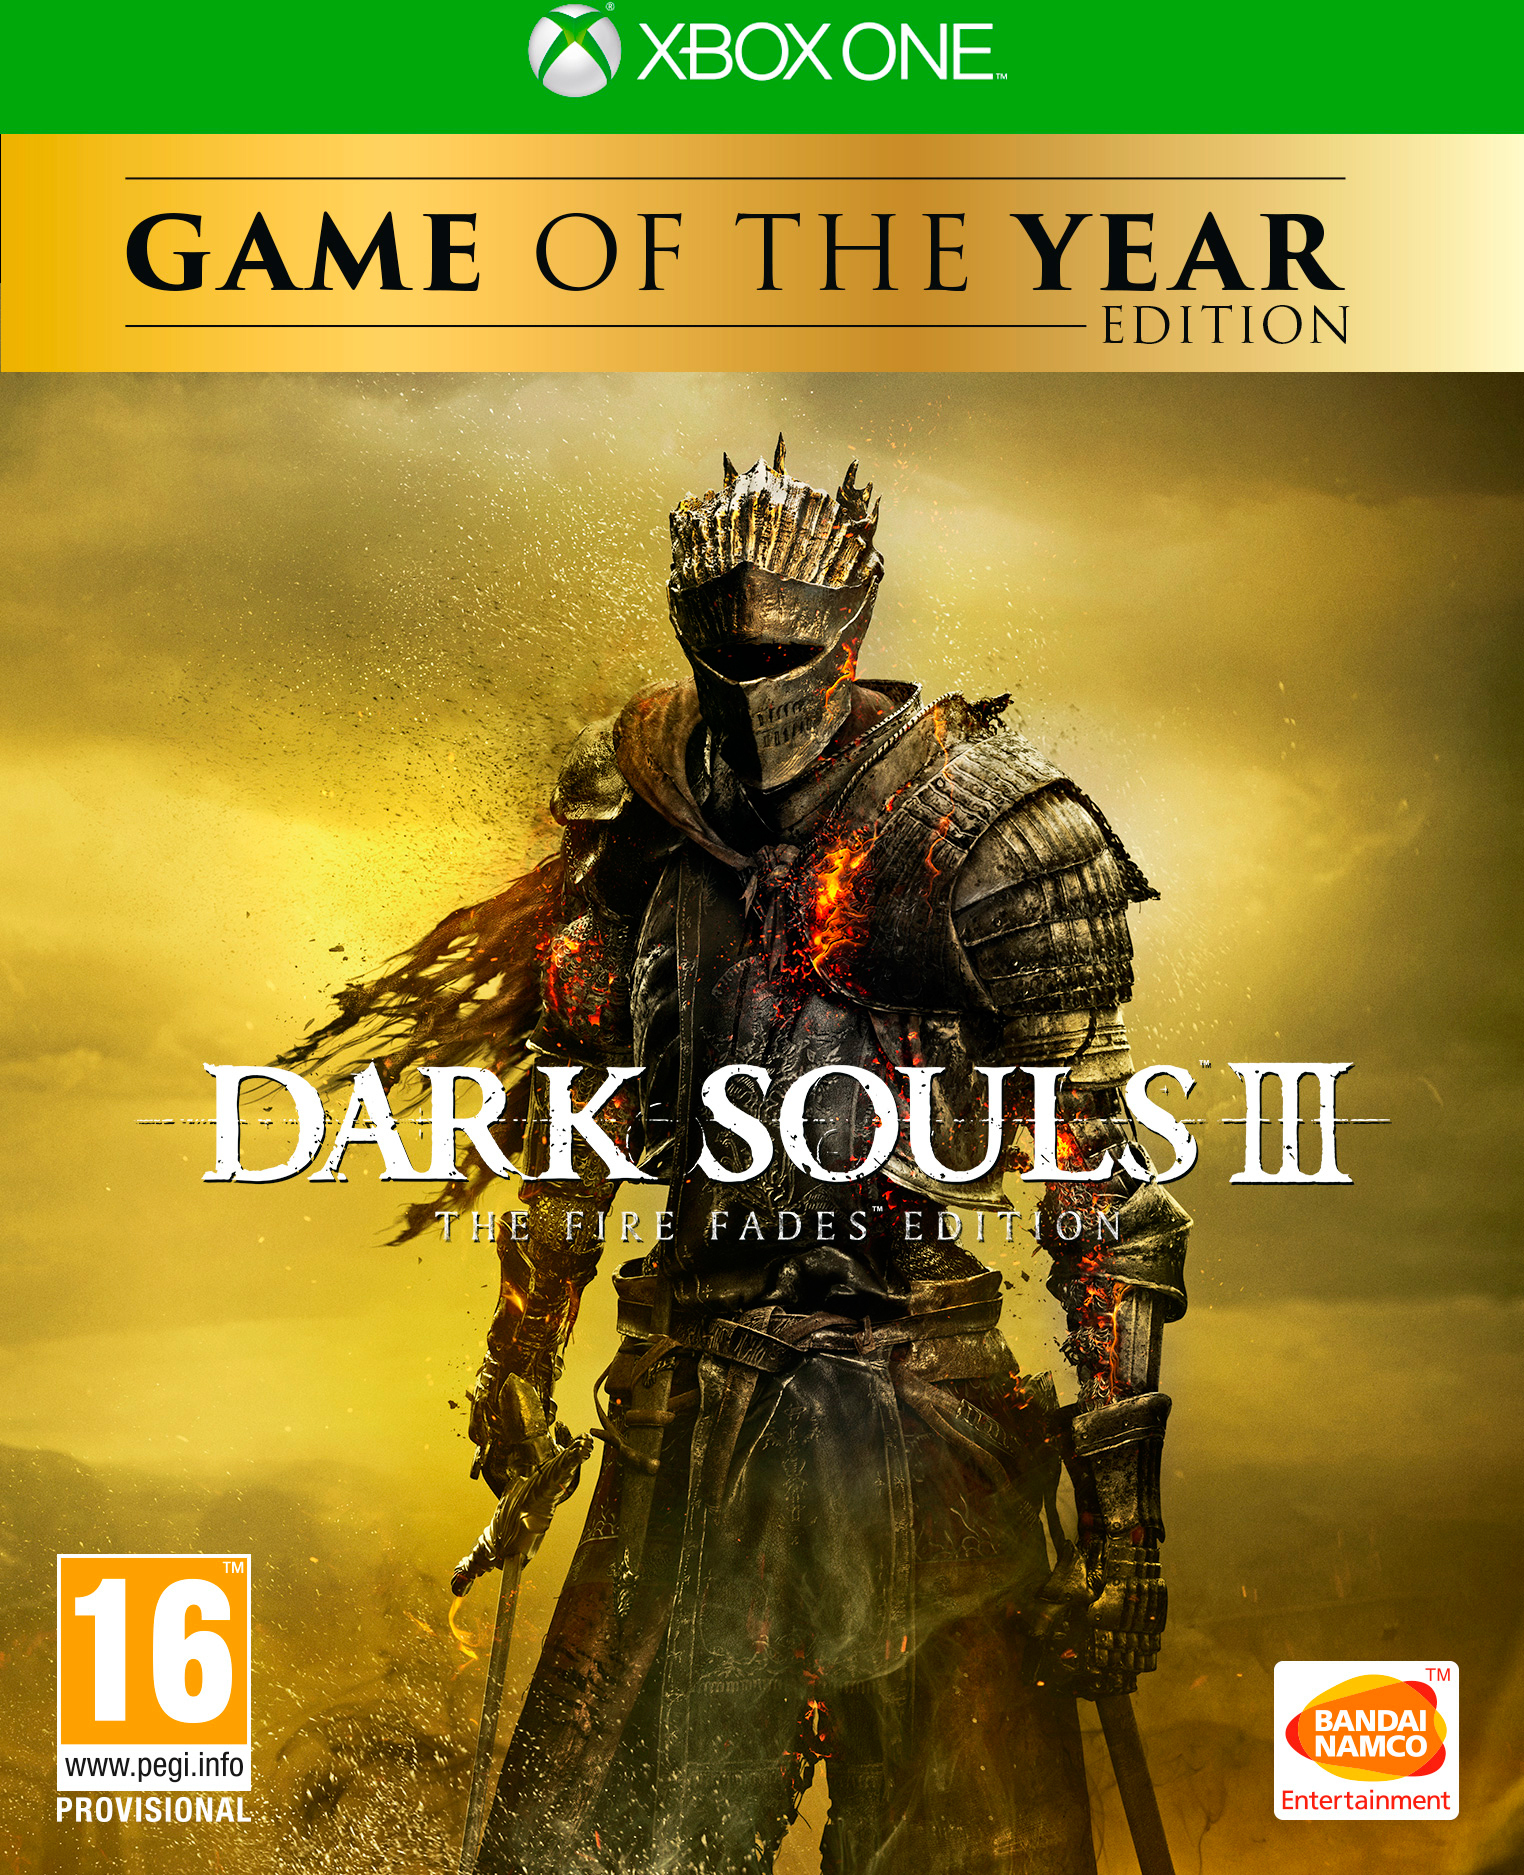 Dark Souls III (3): The Fire Fades Edition – GOTY (Game of the Year Edition)